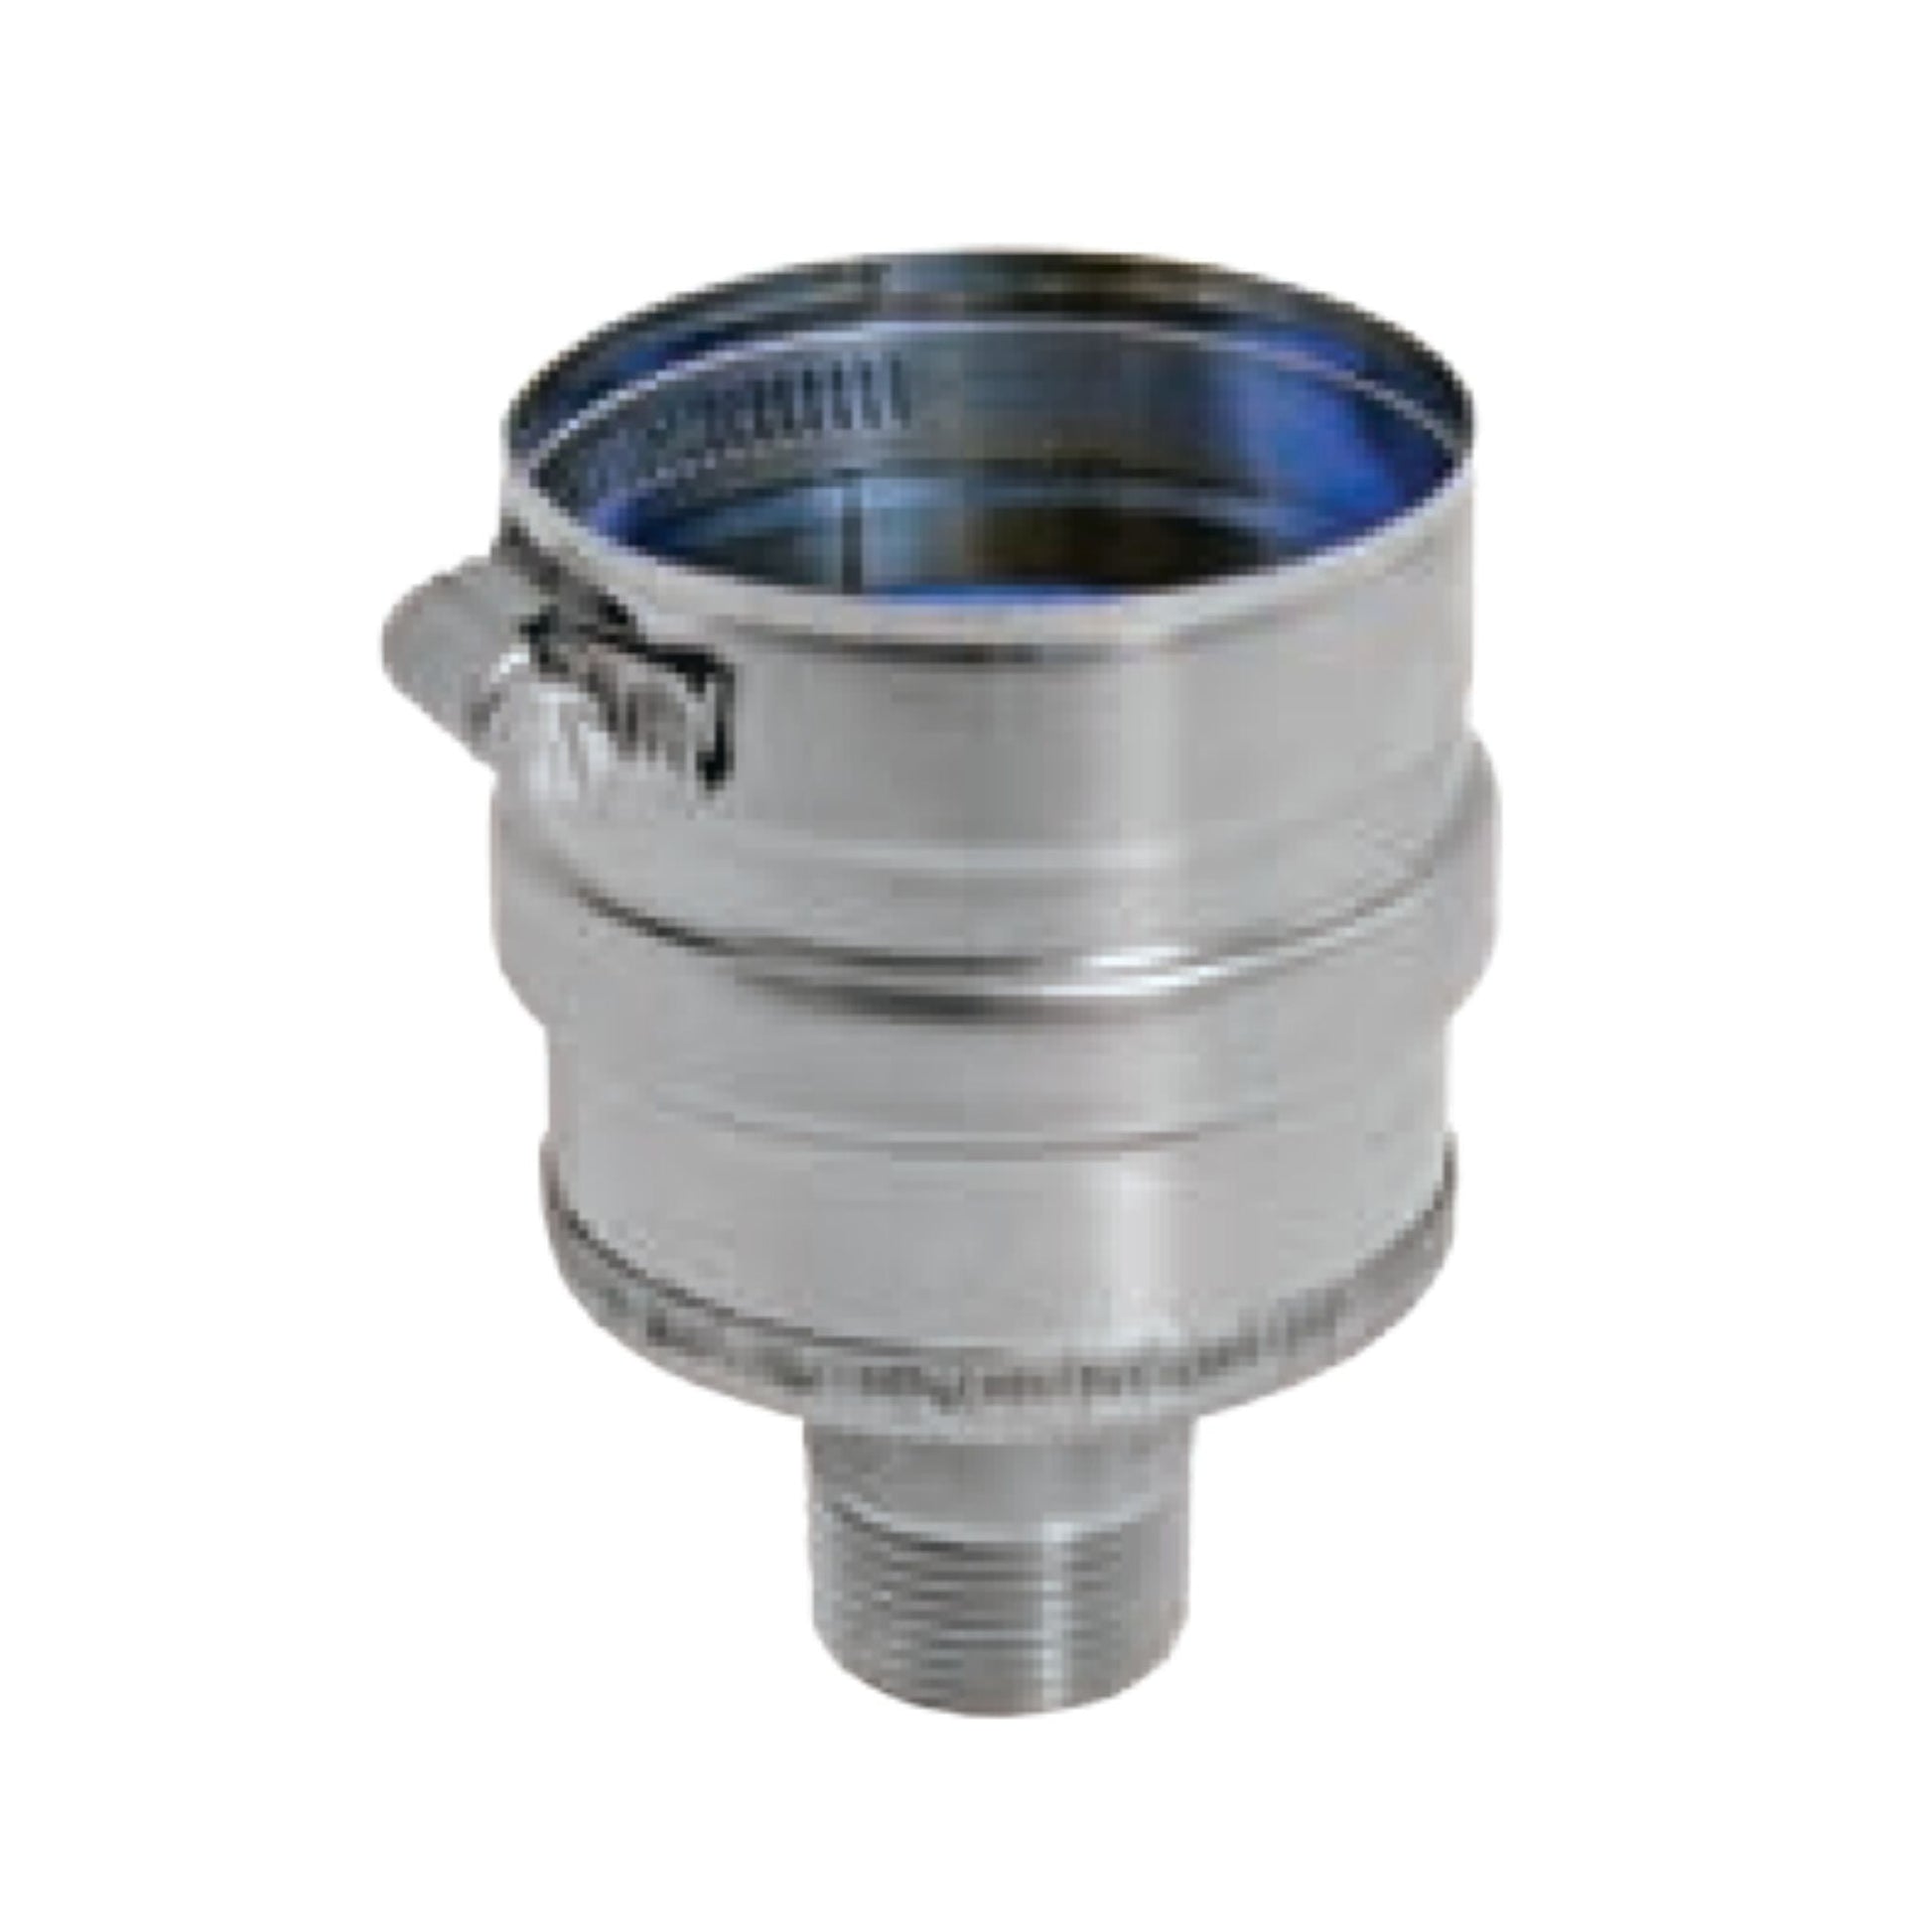 DuraVent FasNSeal 10" 29-4C Stainless Steel IPS Drain Fitting